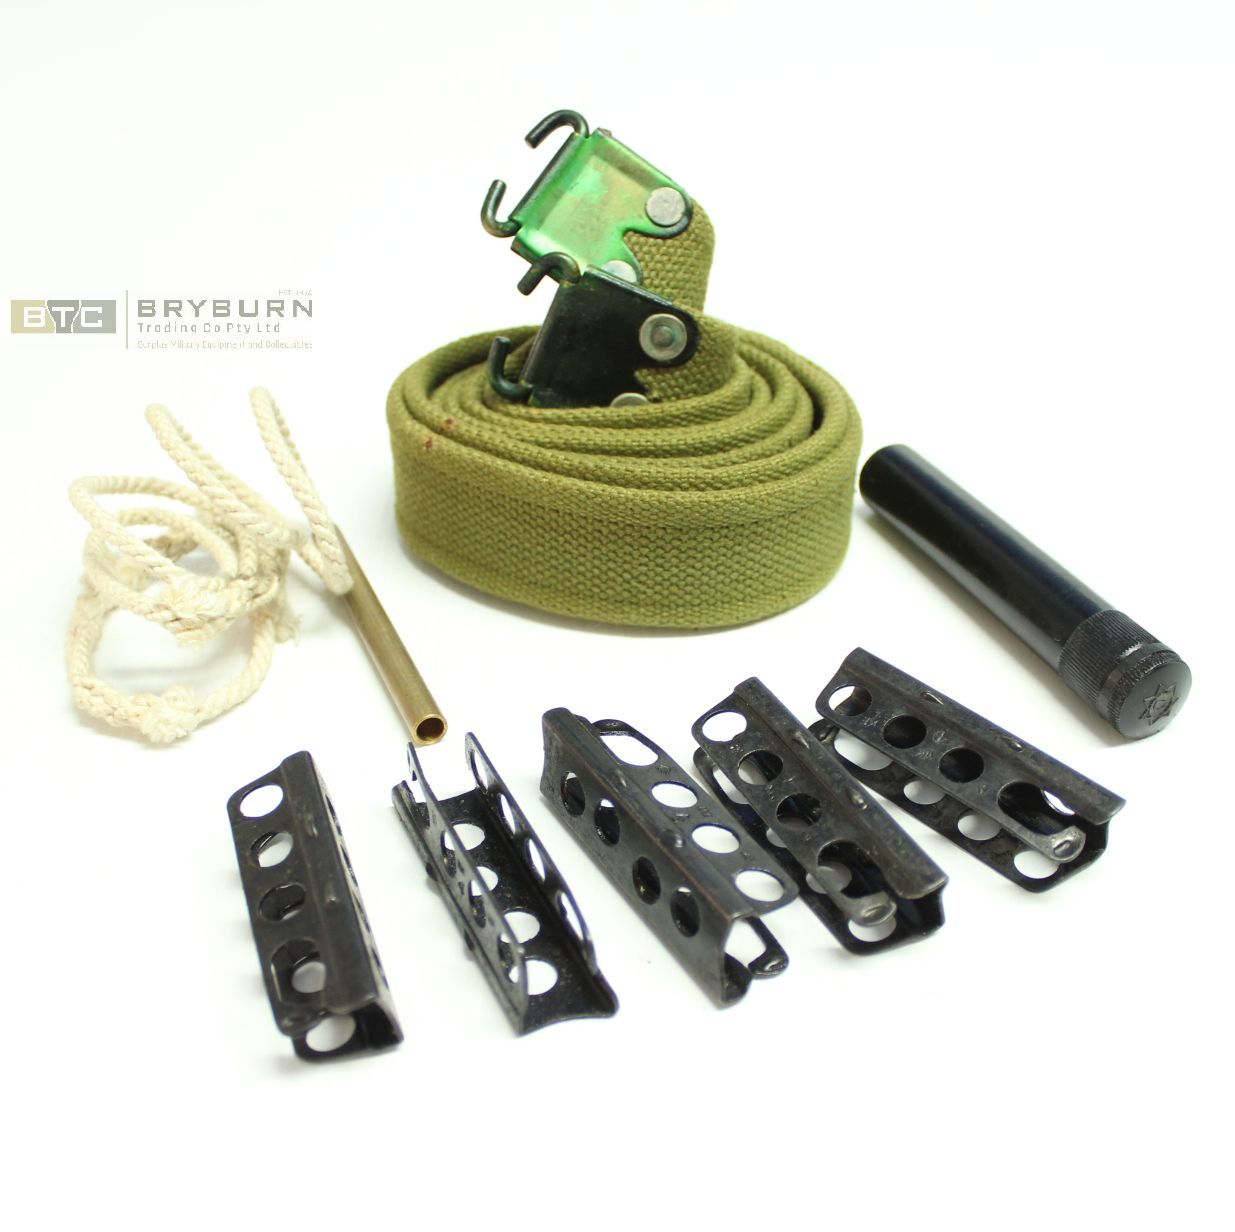 Australian Enfield SMLE 303 Rifle Accessories Set #3 - Original with Long Sling - Free Postage